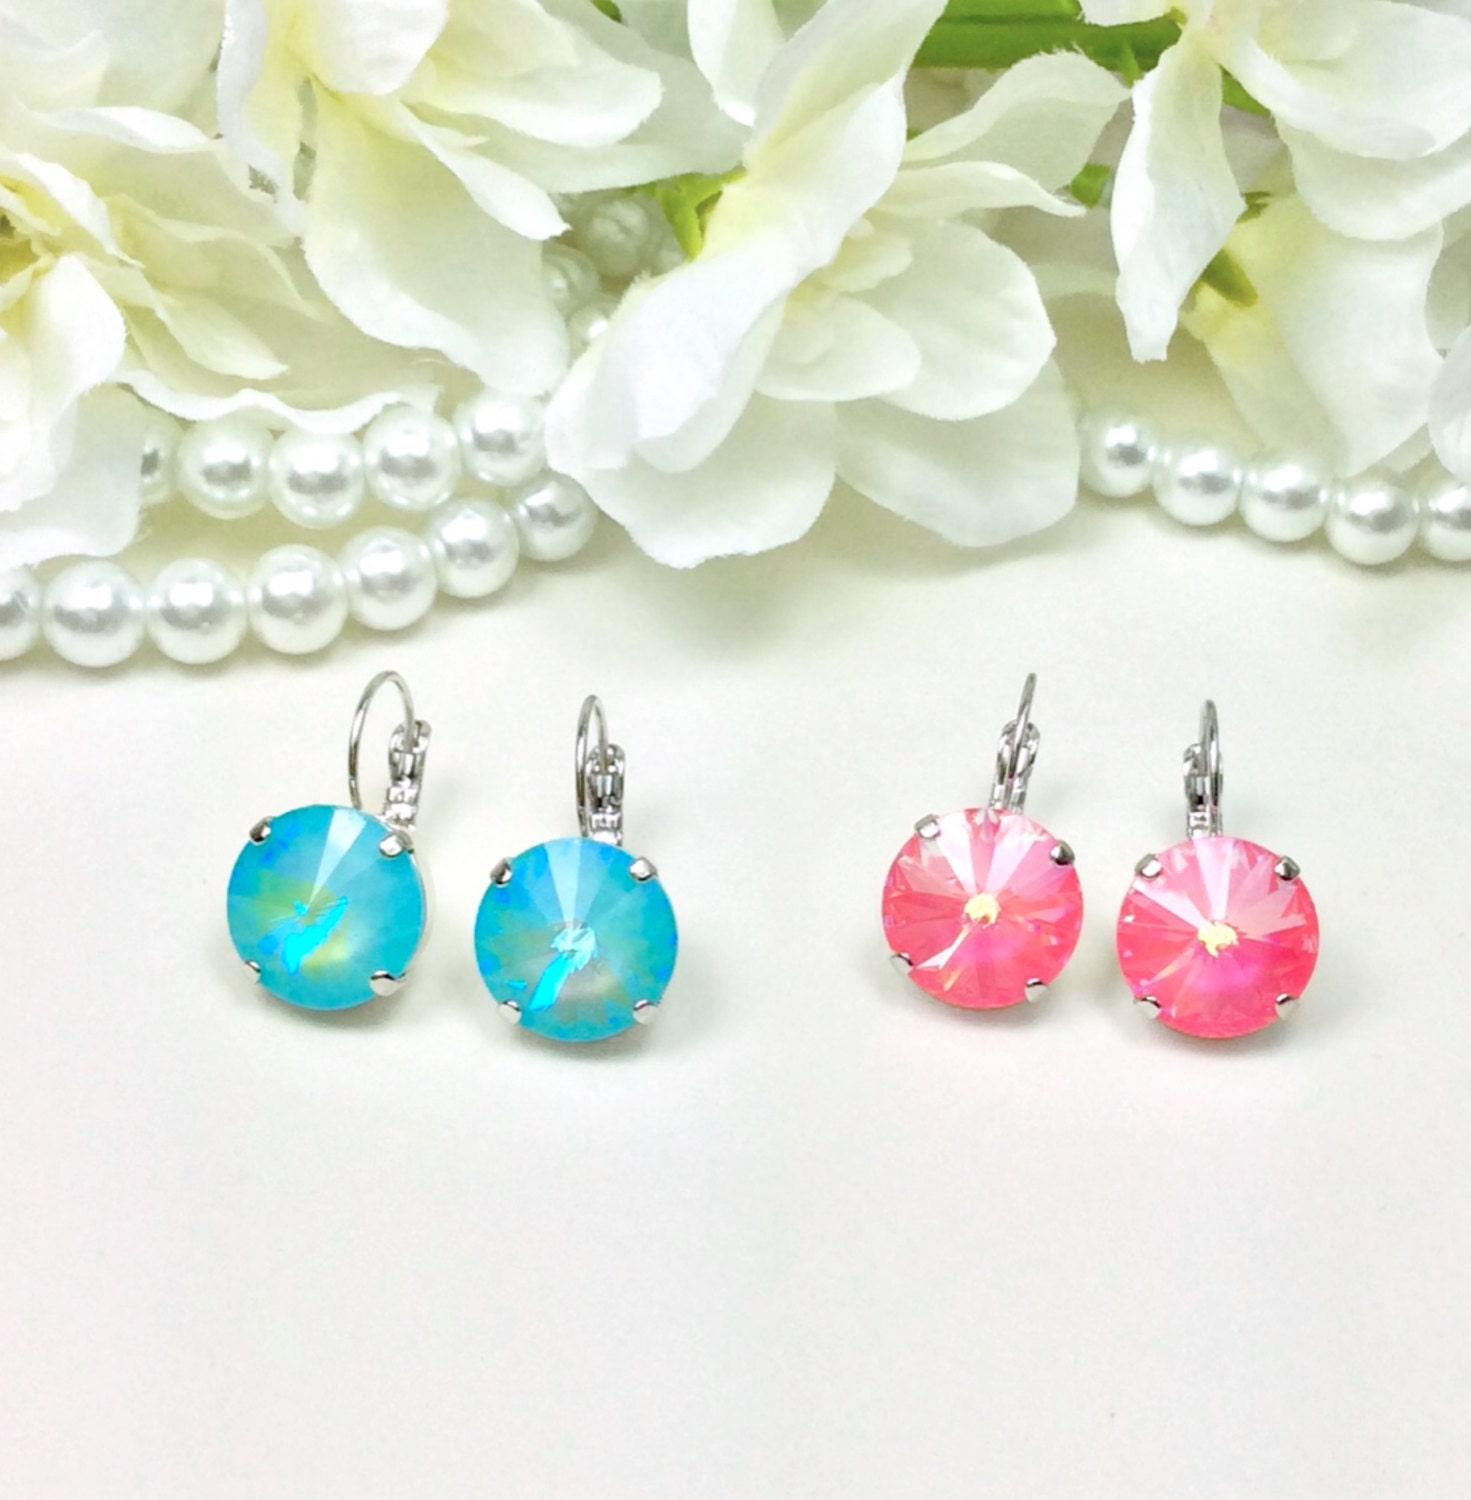 Swarovski Crystal Earrings 14mm - Ultra Turquoise A B or Ultra Pink Coral AB Crystals  - Super Sparkle & Shimmer - FREE SHIPPING